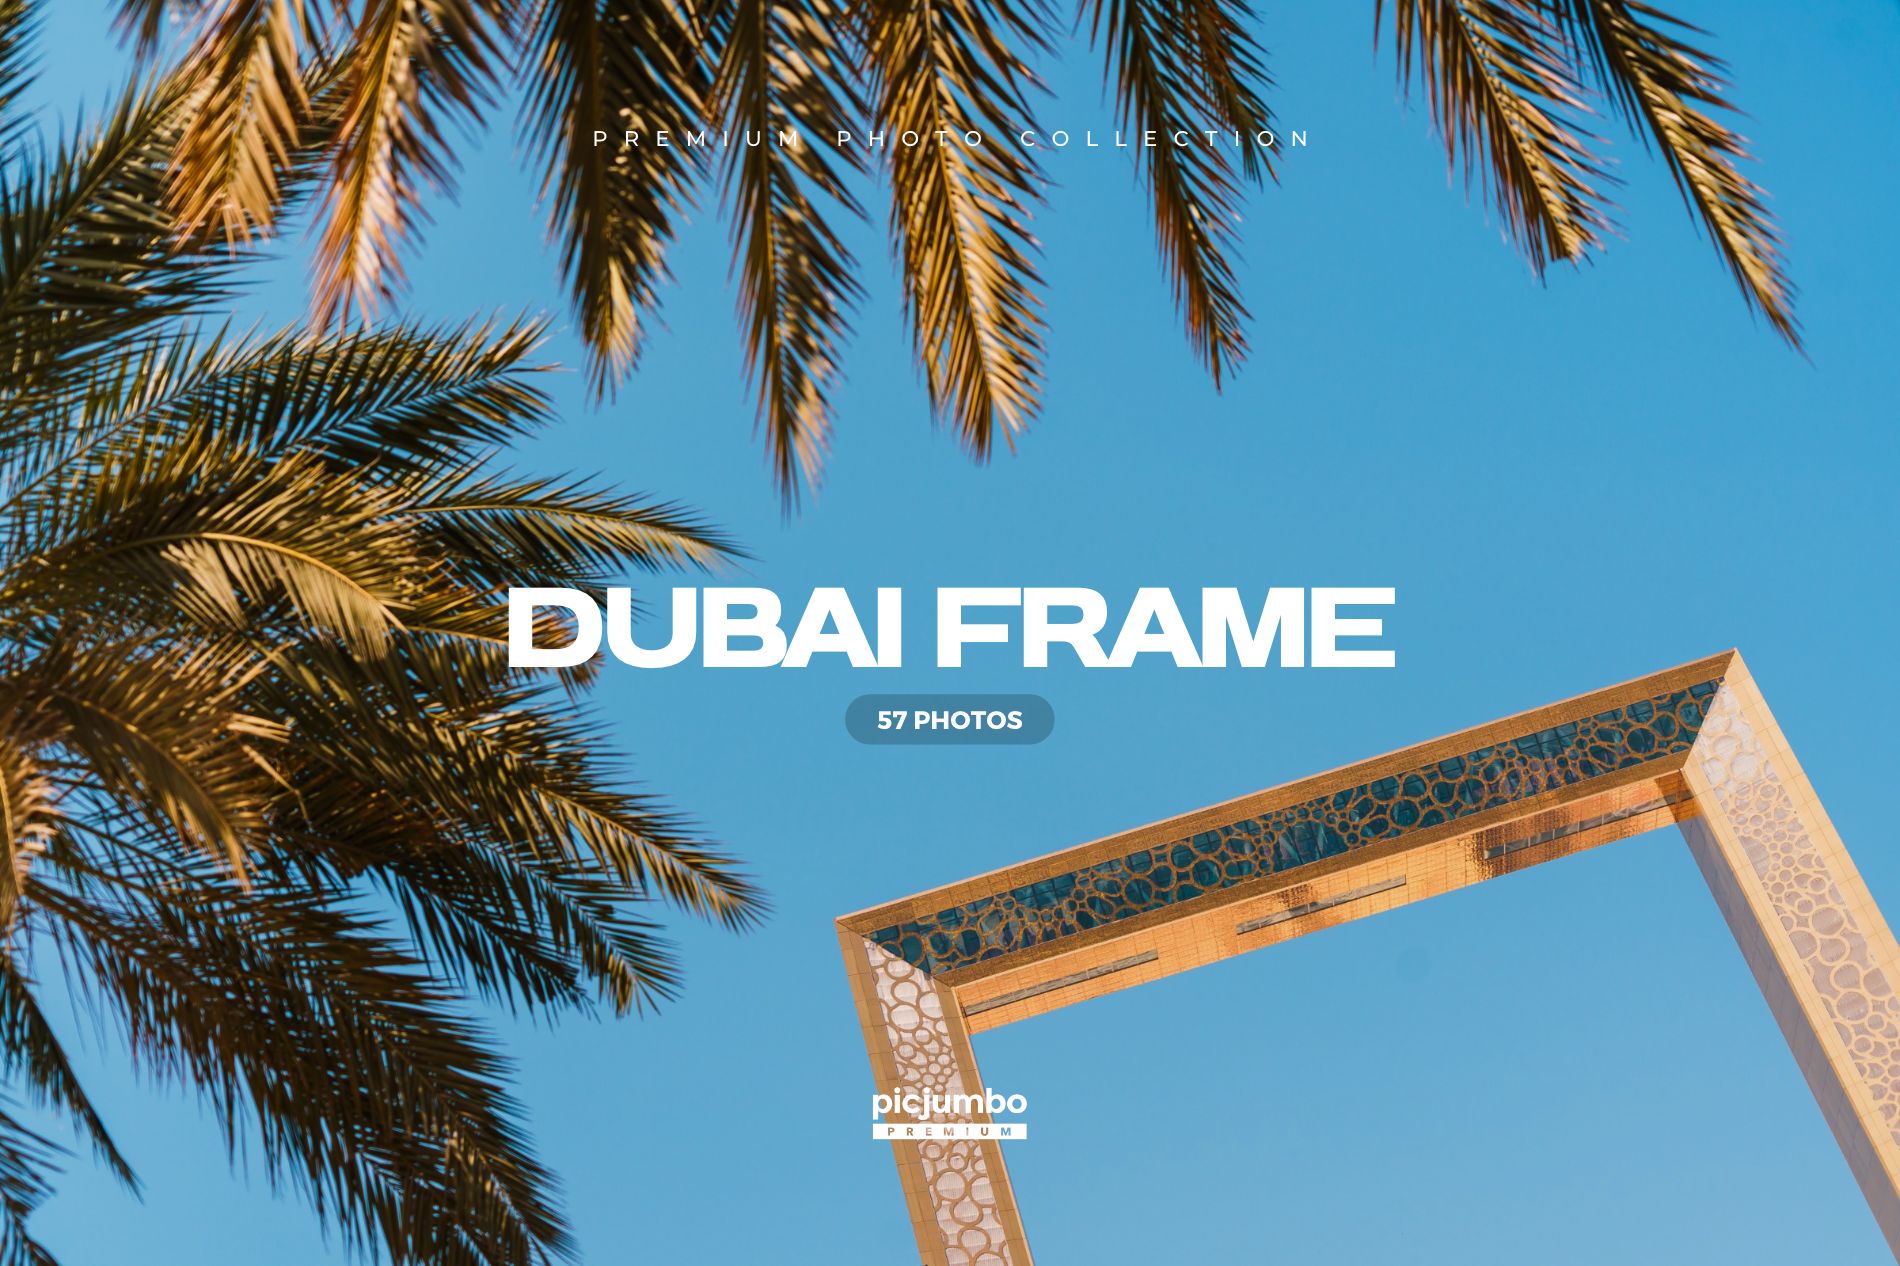 Download hi-res stock photos from our Dubai Frame PREMIUM Collection!